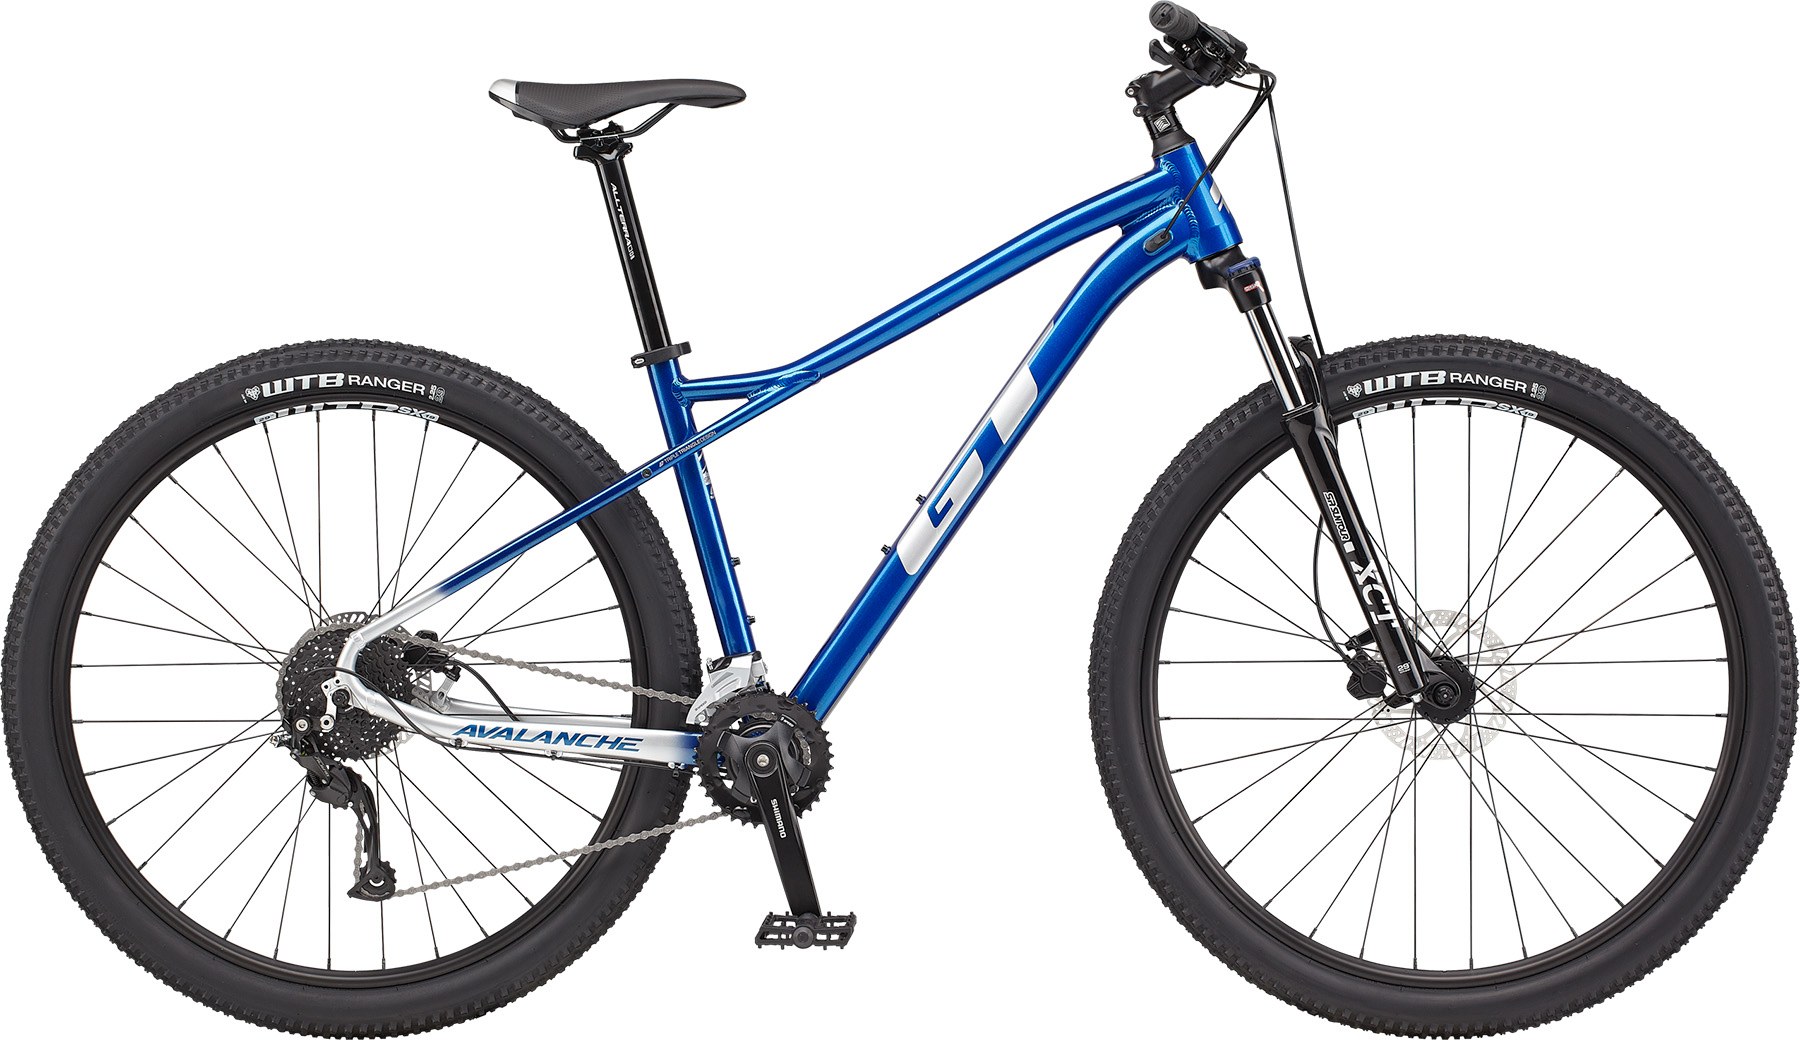 Avalanche Sport 29 2022 Review